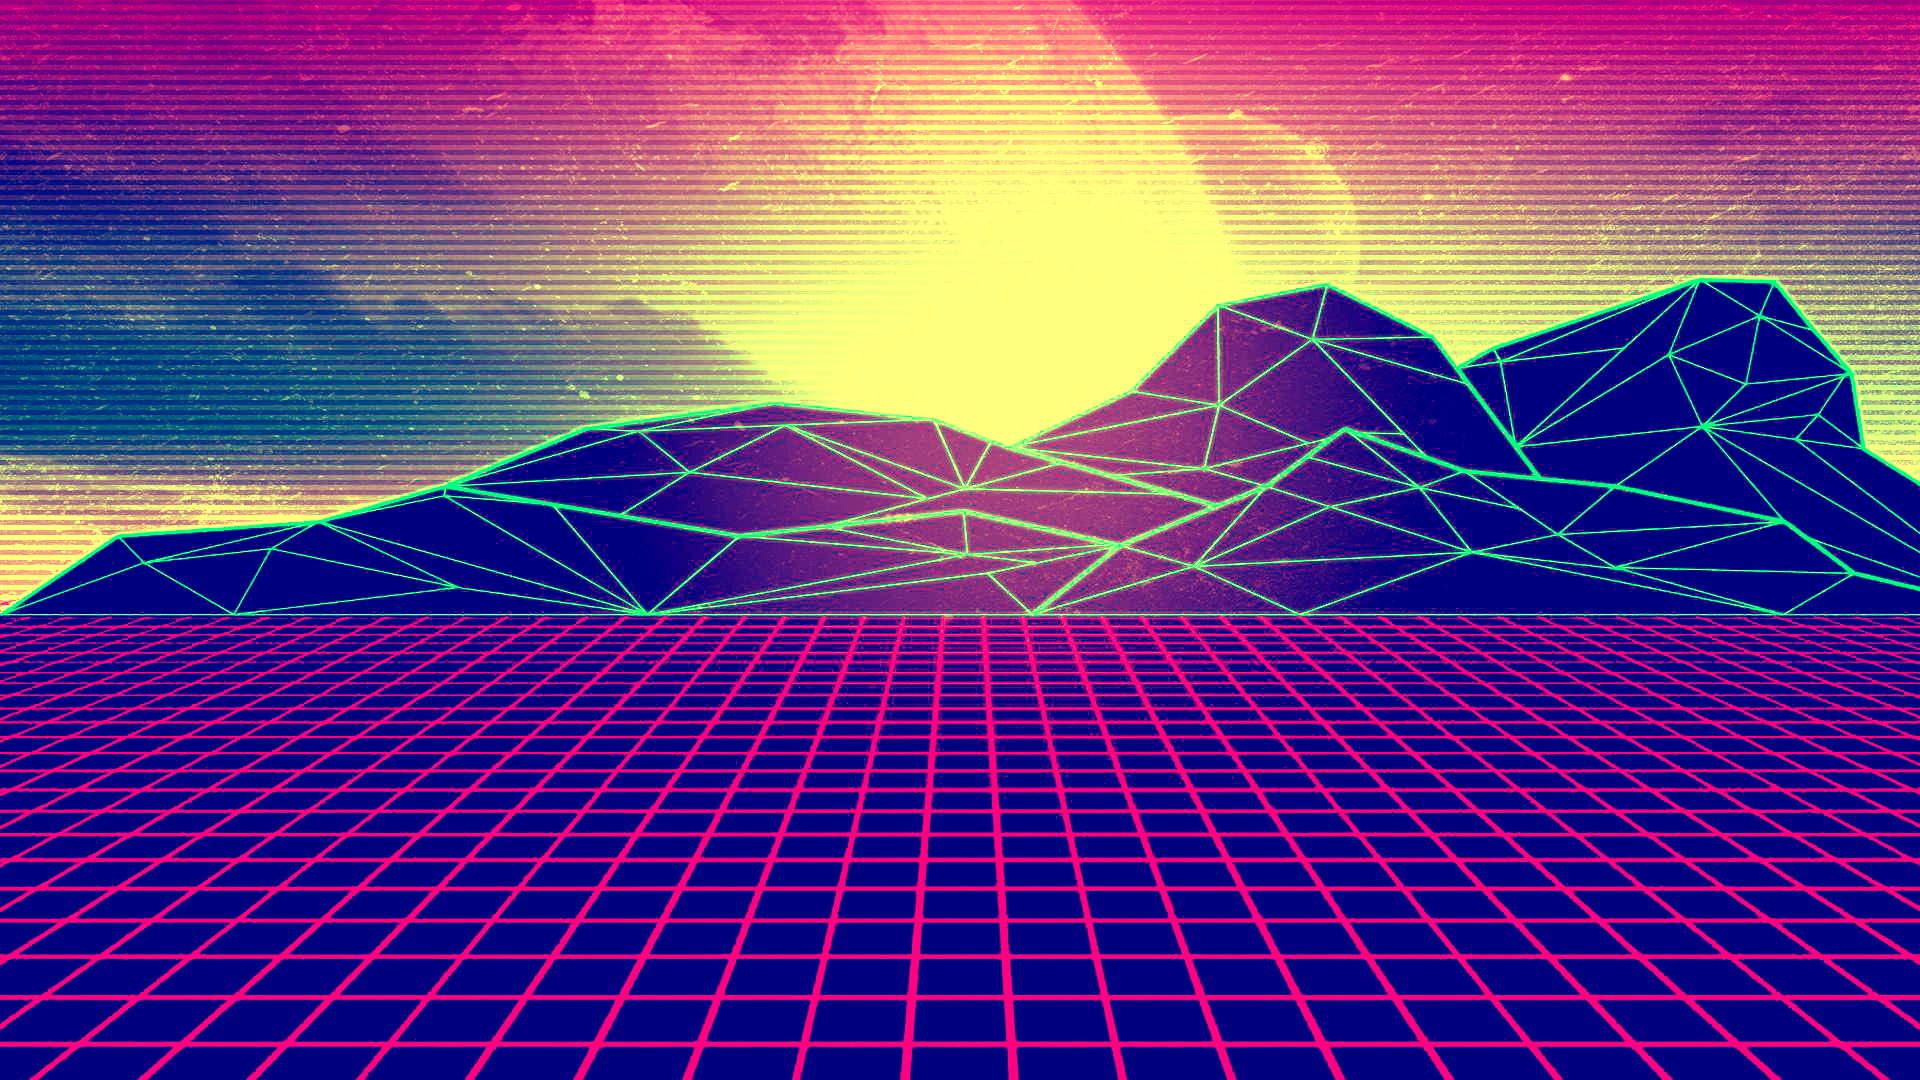 Vaporwave Wallpapers 1920x1080 posted by Michelle Johnson.